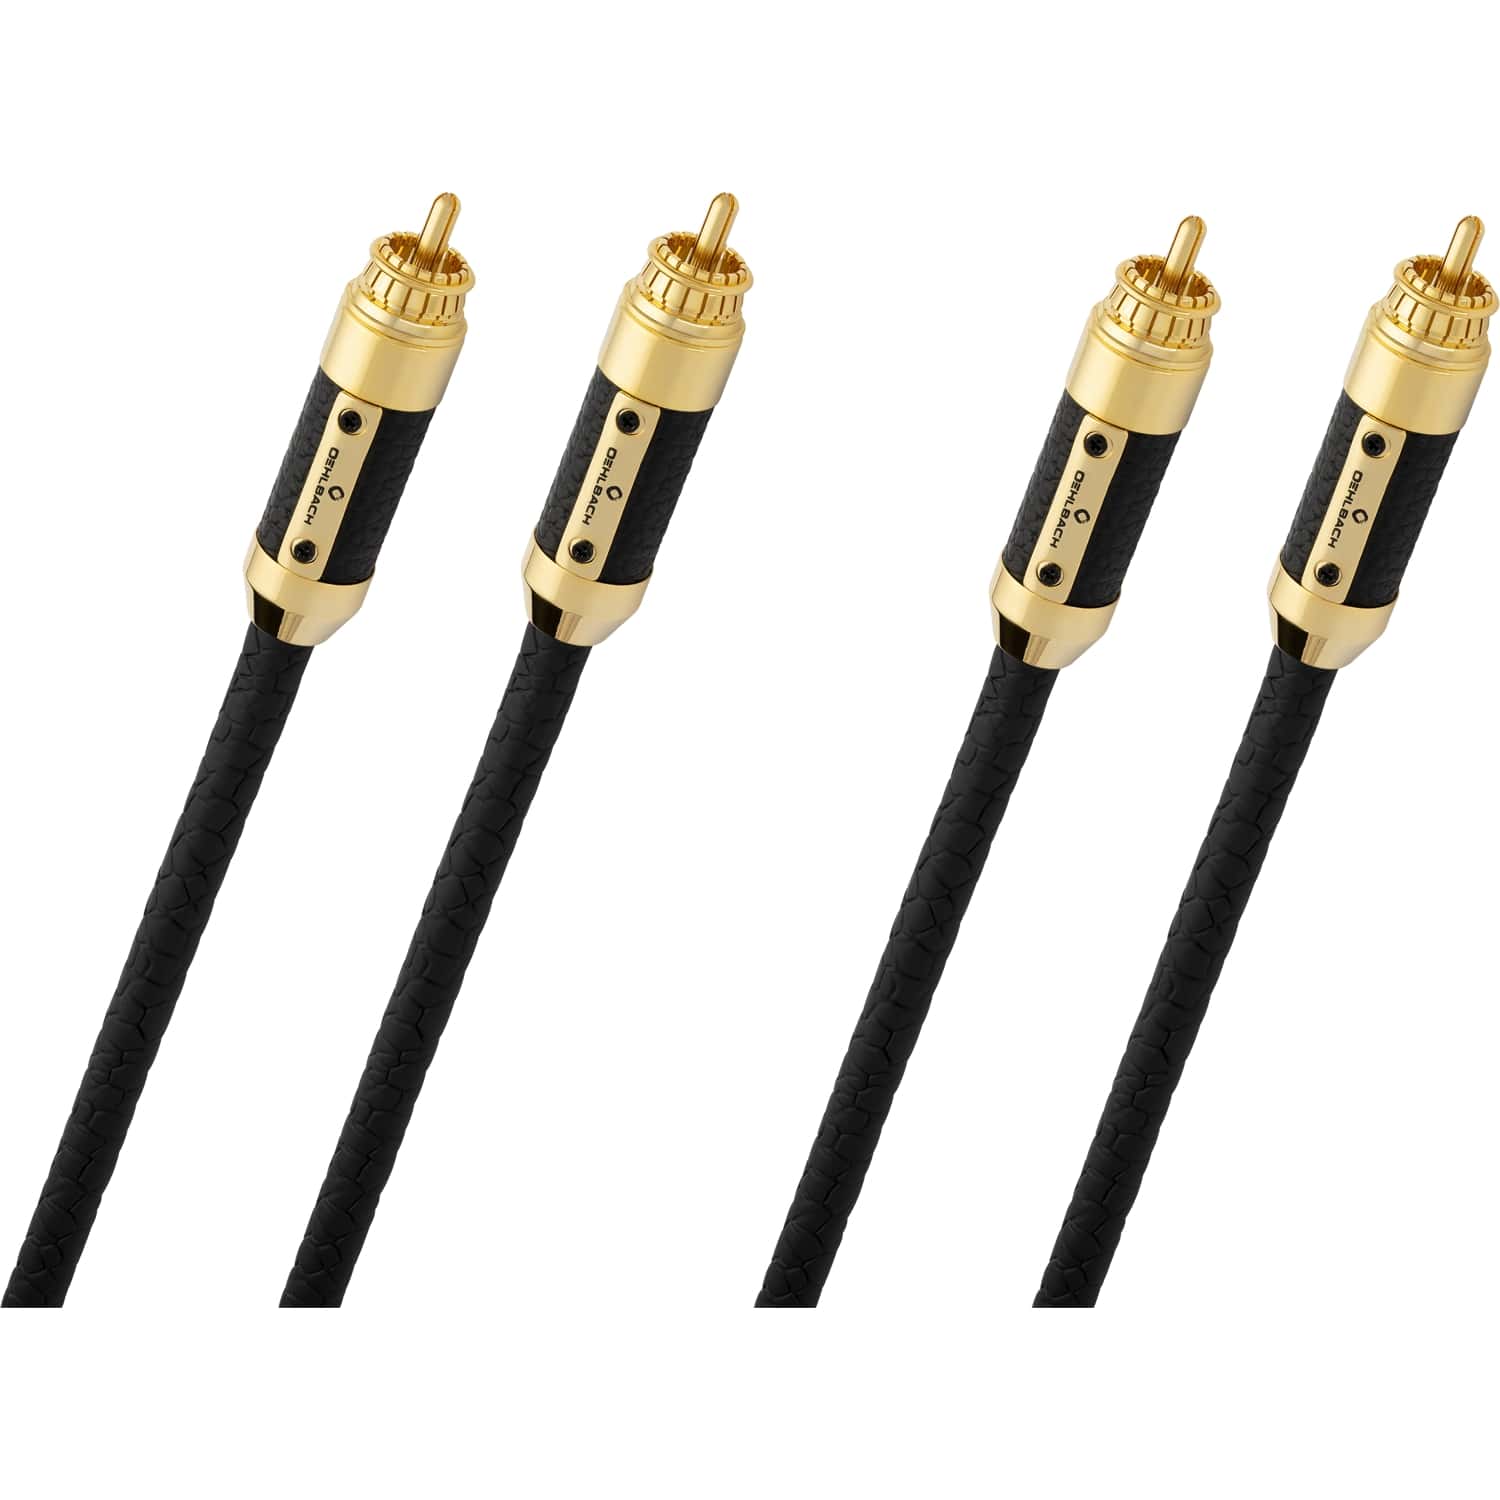 Кабели межблочные аудио Oehlbach STATE OF THE ART XXL Black Connection Cable RCA, 2x1,50m, gold